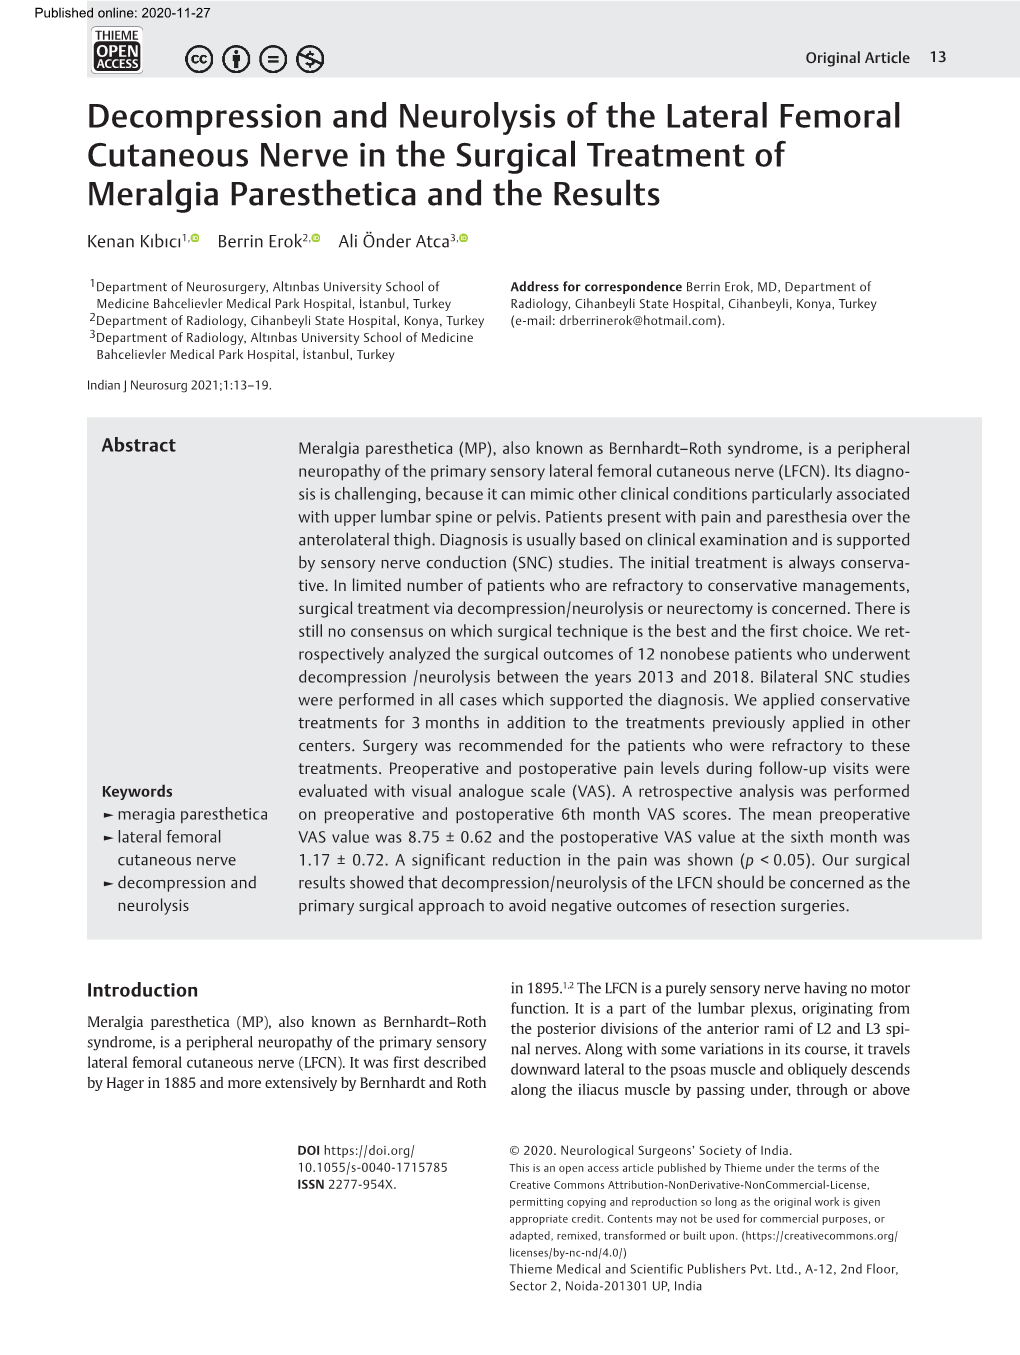 Decompression and Neurolysis of the Lateral Femoral Cutaneous Nerve in the Surgical Treatment of Meralgia Paresthetica and the Results